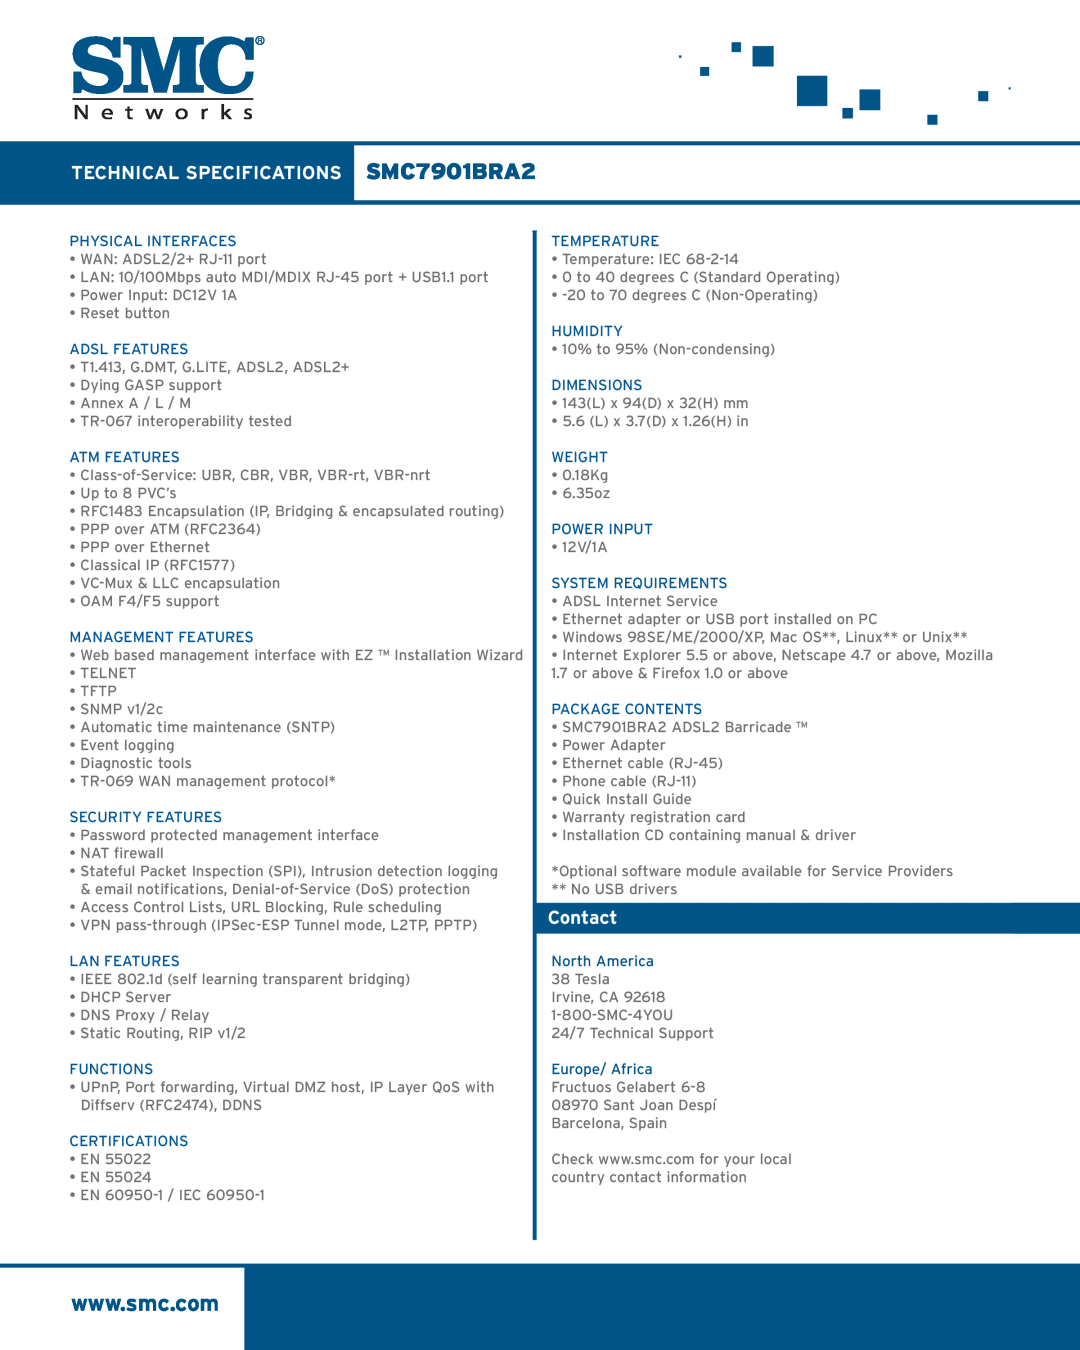 SMC Networks manual TECHNICAL SPECIFICATIONS SMC7901BRA2, Contact, North America, Europe/ Africa 